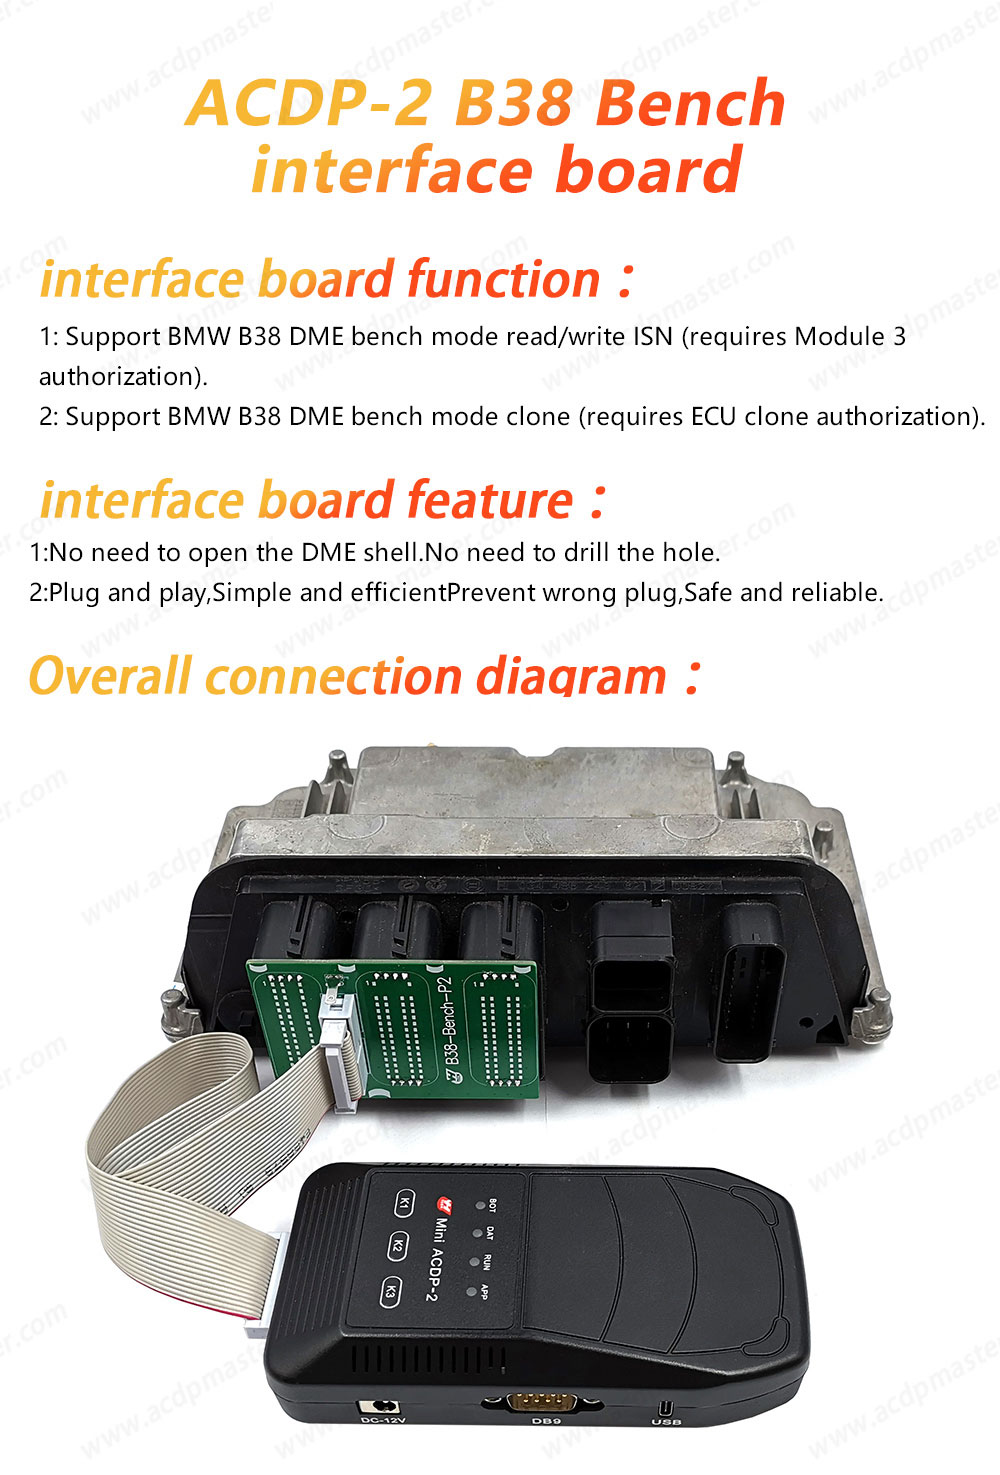 Connect B38 Interface Board with ACDP 2 1